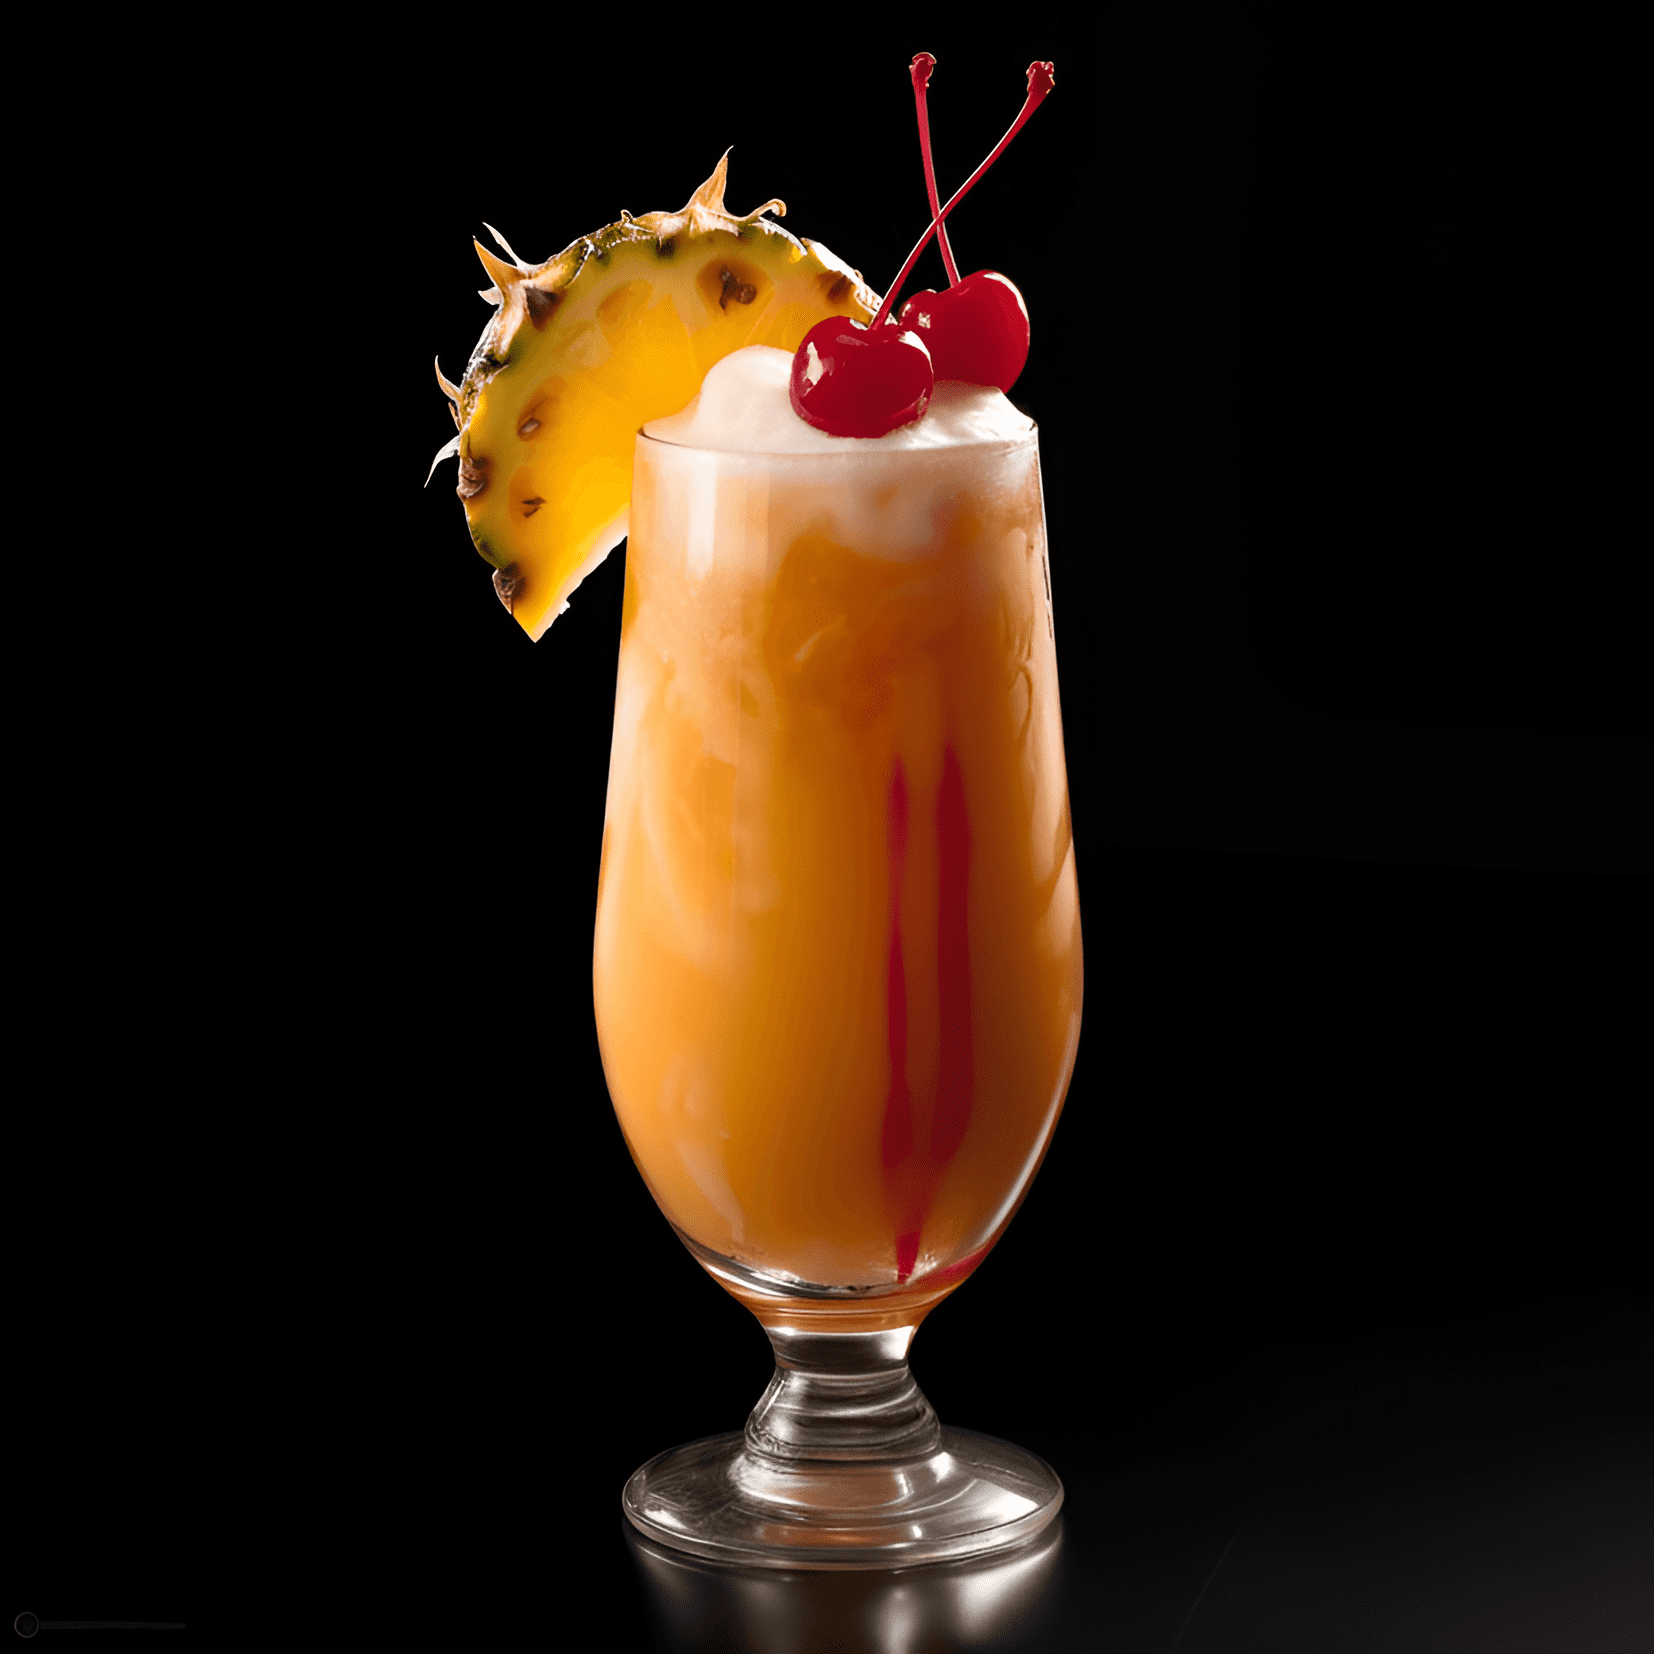 Typhoon Cocktail Recipe - The Typhoon cocktail is a sweet, fruity, and refreshing drink with a hint of tartness. It has a tropical flavor profile, featuring notes of pineapple, orange, and lime. The rum adds a warm, smooth, and slightly spicy kick.